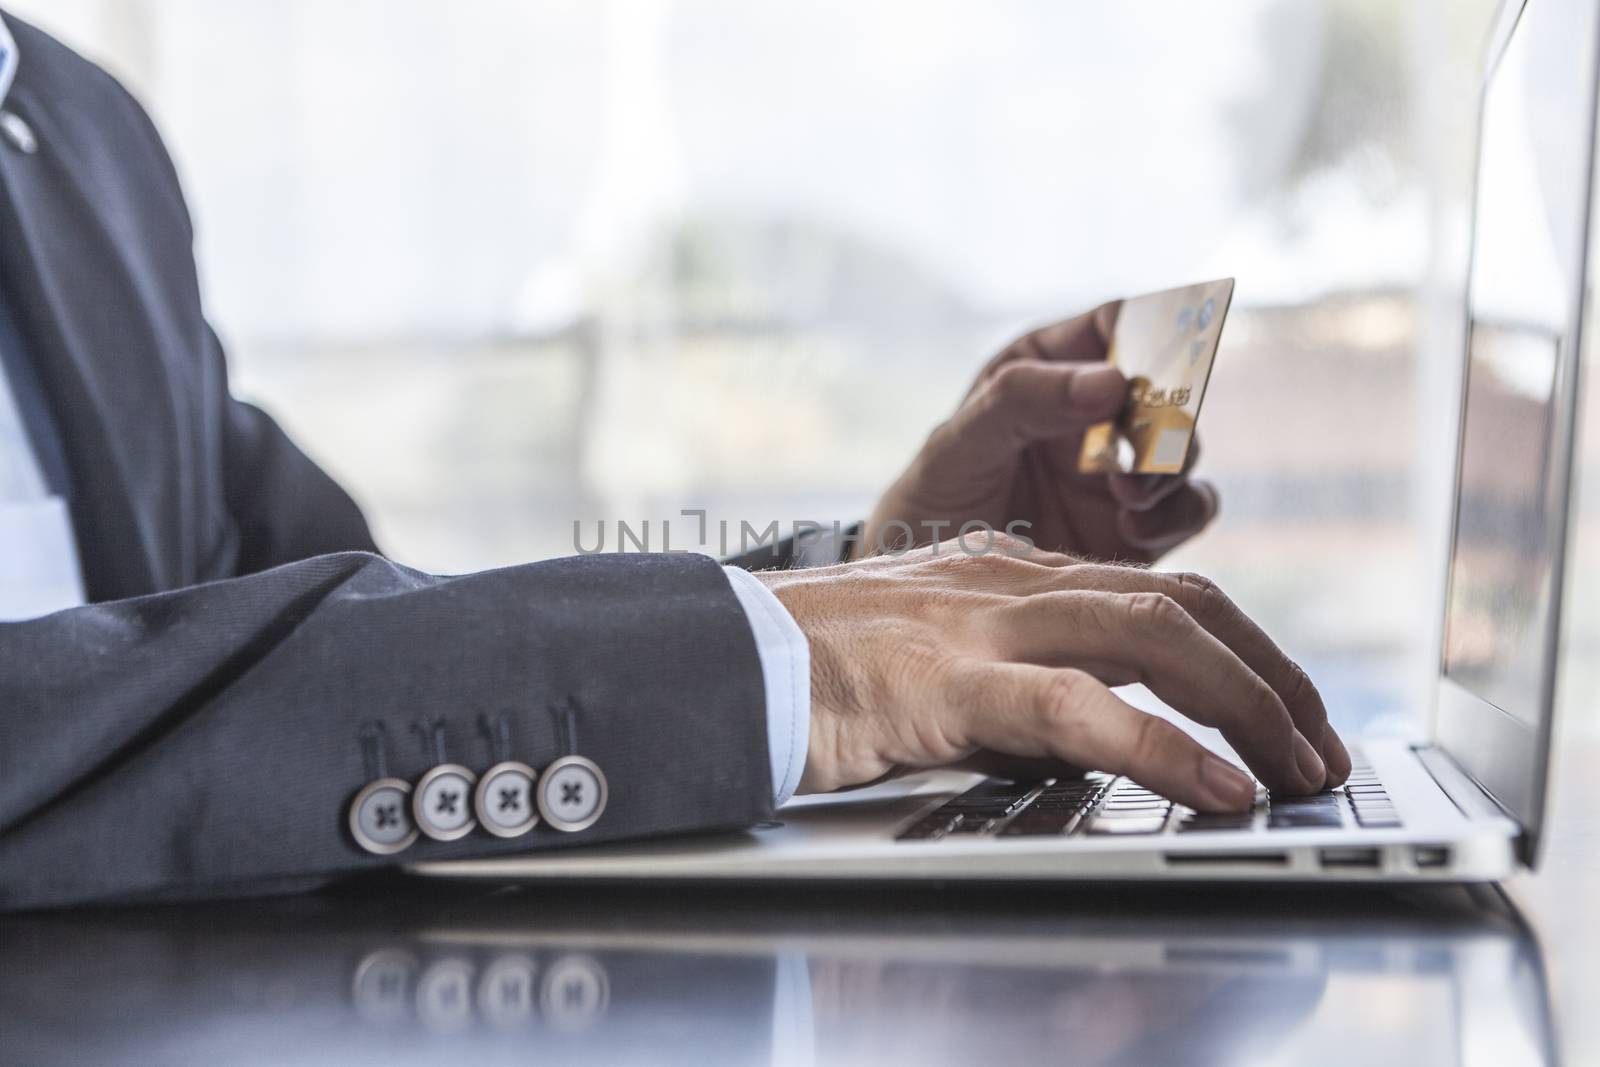 Man in suit using card and laptop